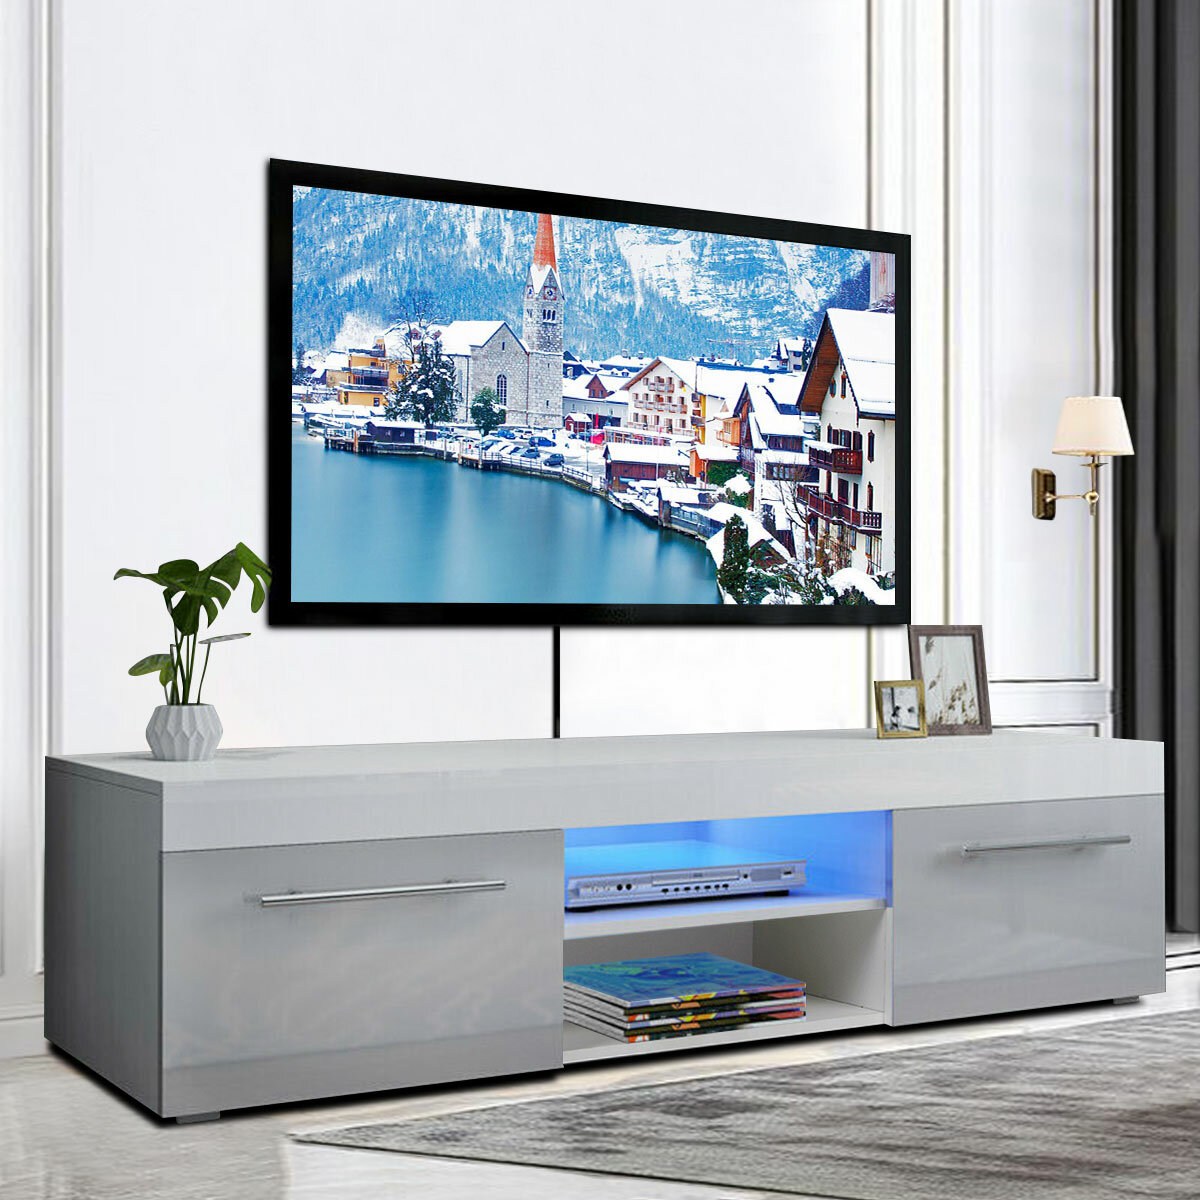 Image of Woodyhome 51" High Gloss TV Stand with LED Lights 2 Drawers Cabinet Modern Storage Holder Entertainment for Home Living